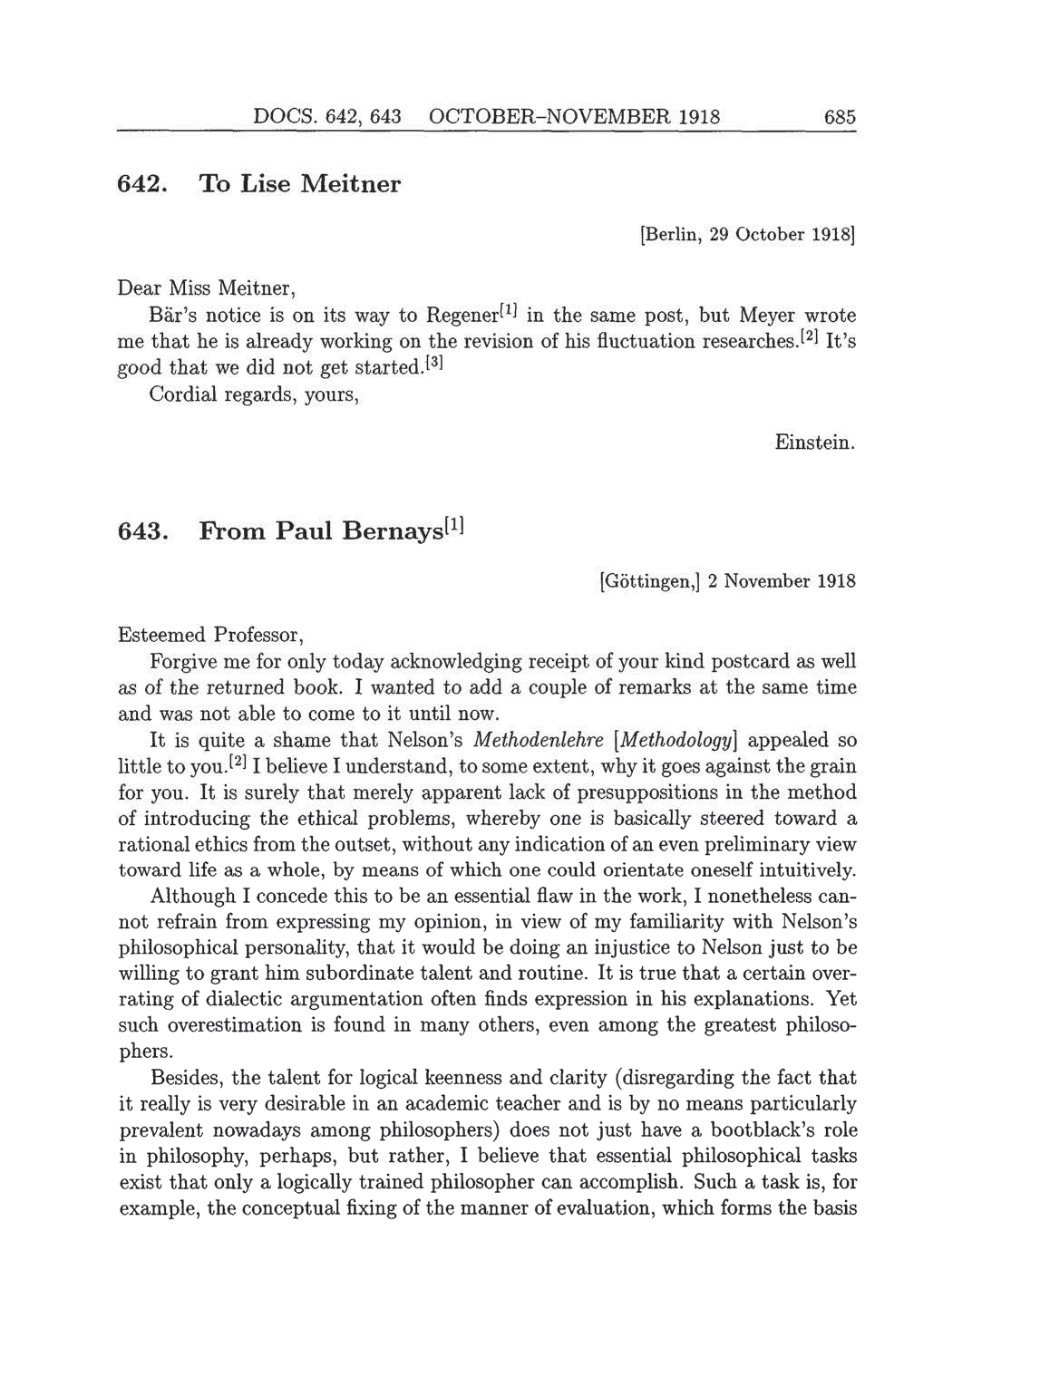 Volume 8: The Berlin Years: Correspondence, 1914-1918 (English translation supplement) page 685